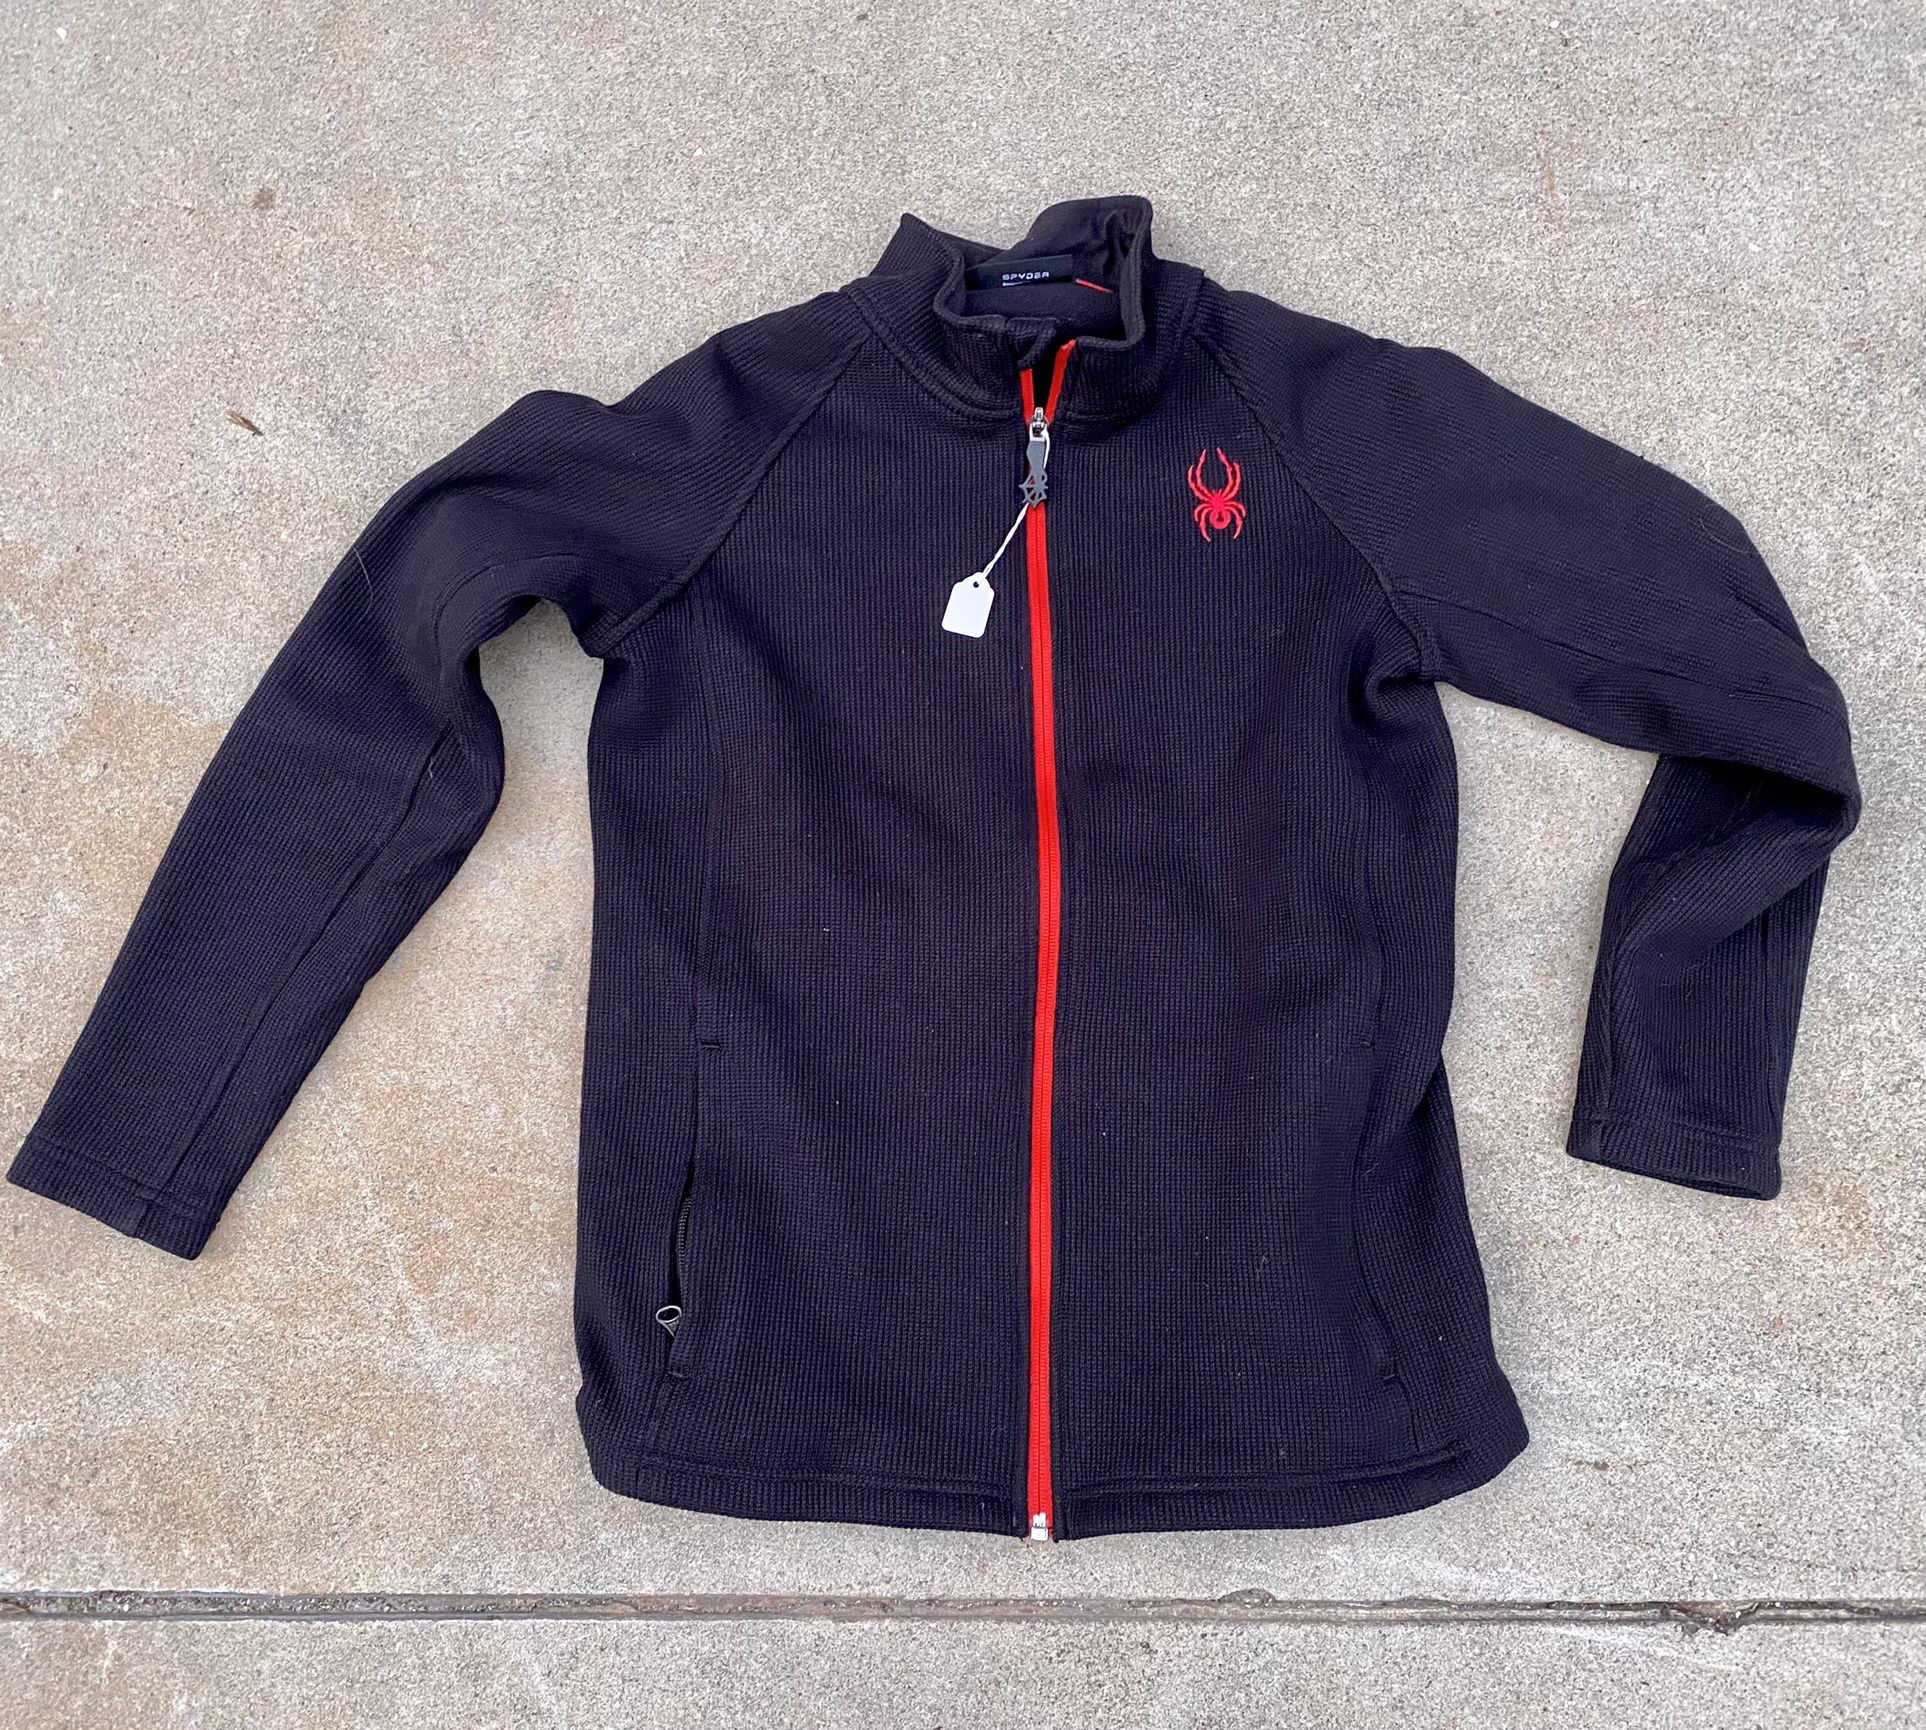 Junior Size Large (14/16) Black With Red Spyder Zip Front Sweat Shirt / Jacket 